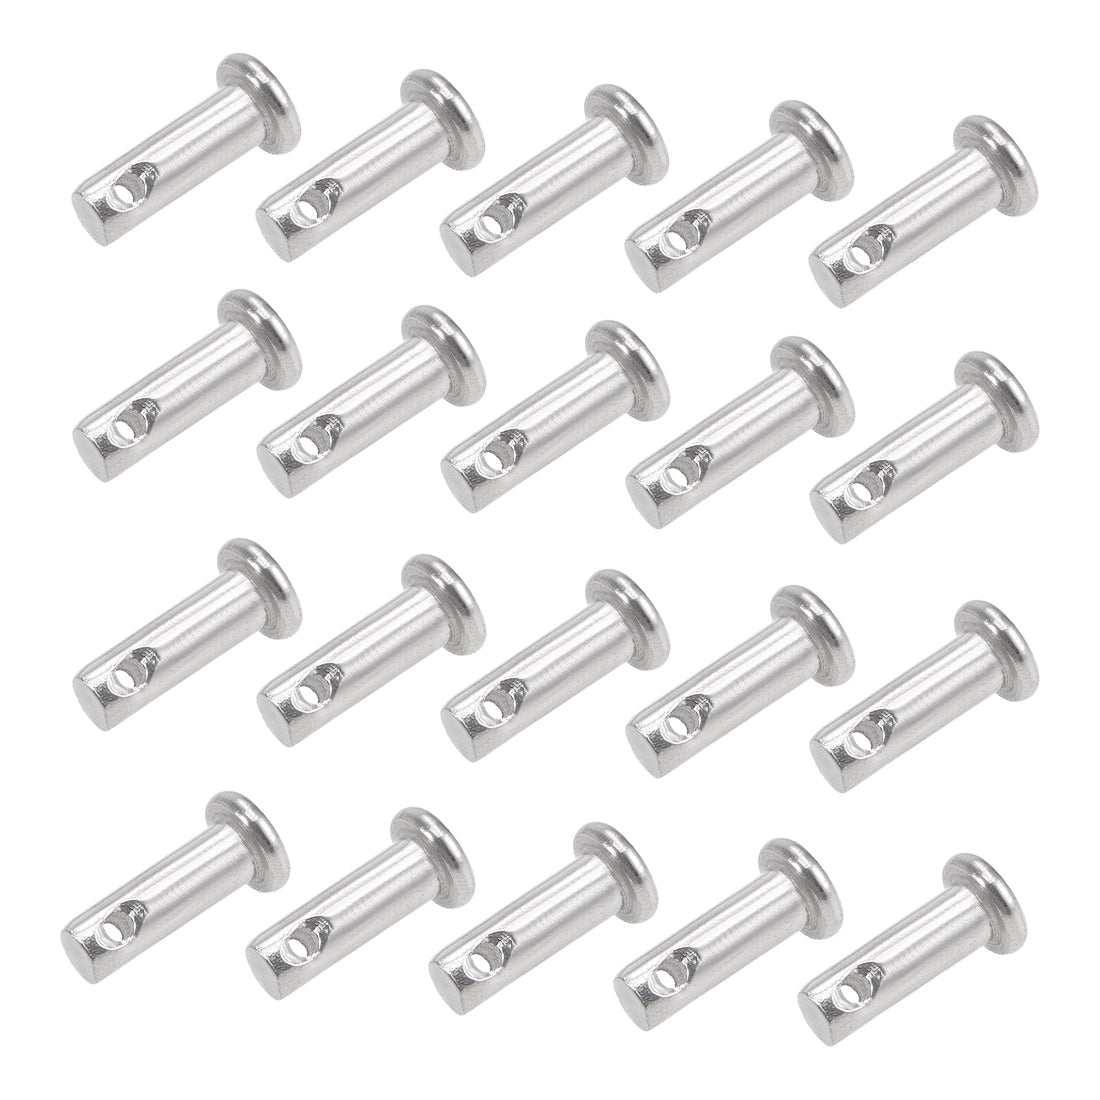 uxcell Uxcell Single Hole Clevis Pins - 4mm x 12mm Flat Head 304 Stainless Steel Link Hinge Pin 20Pcs